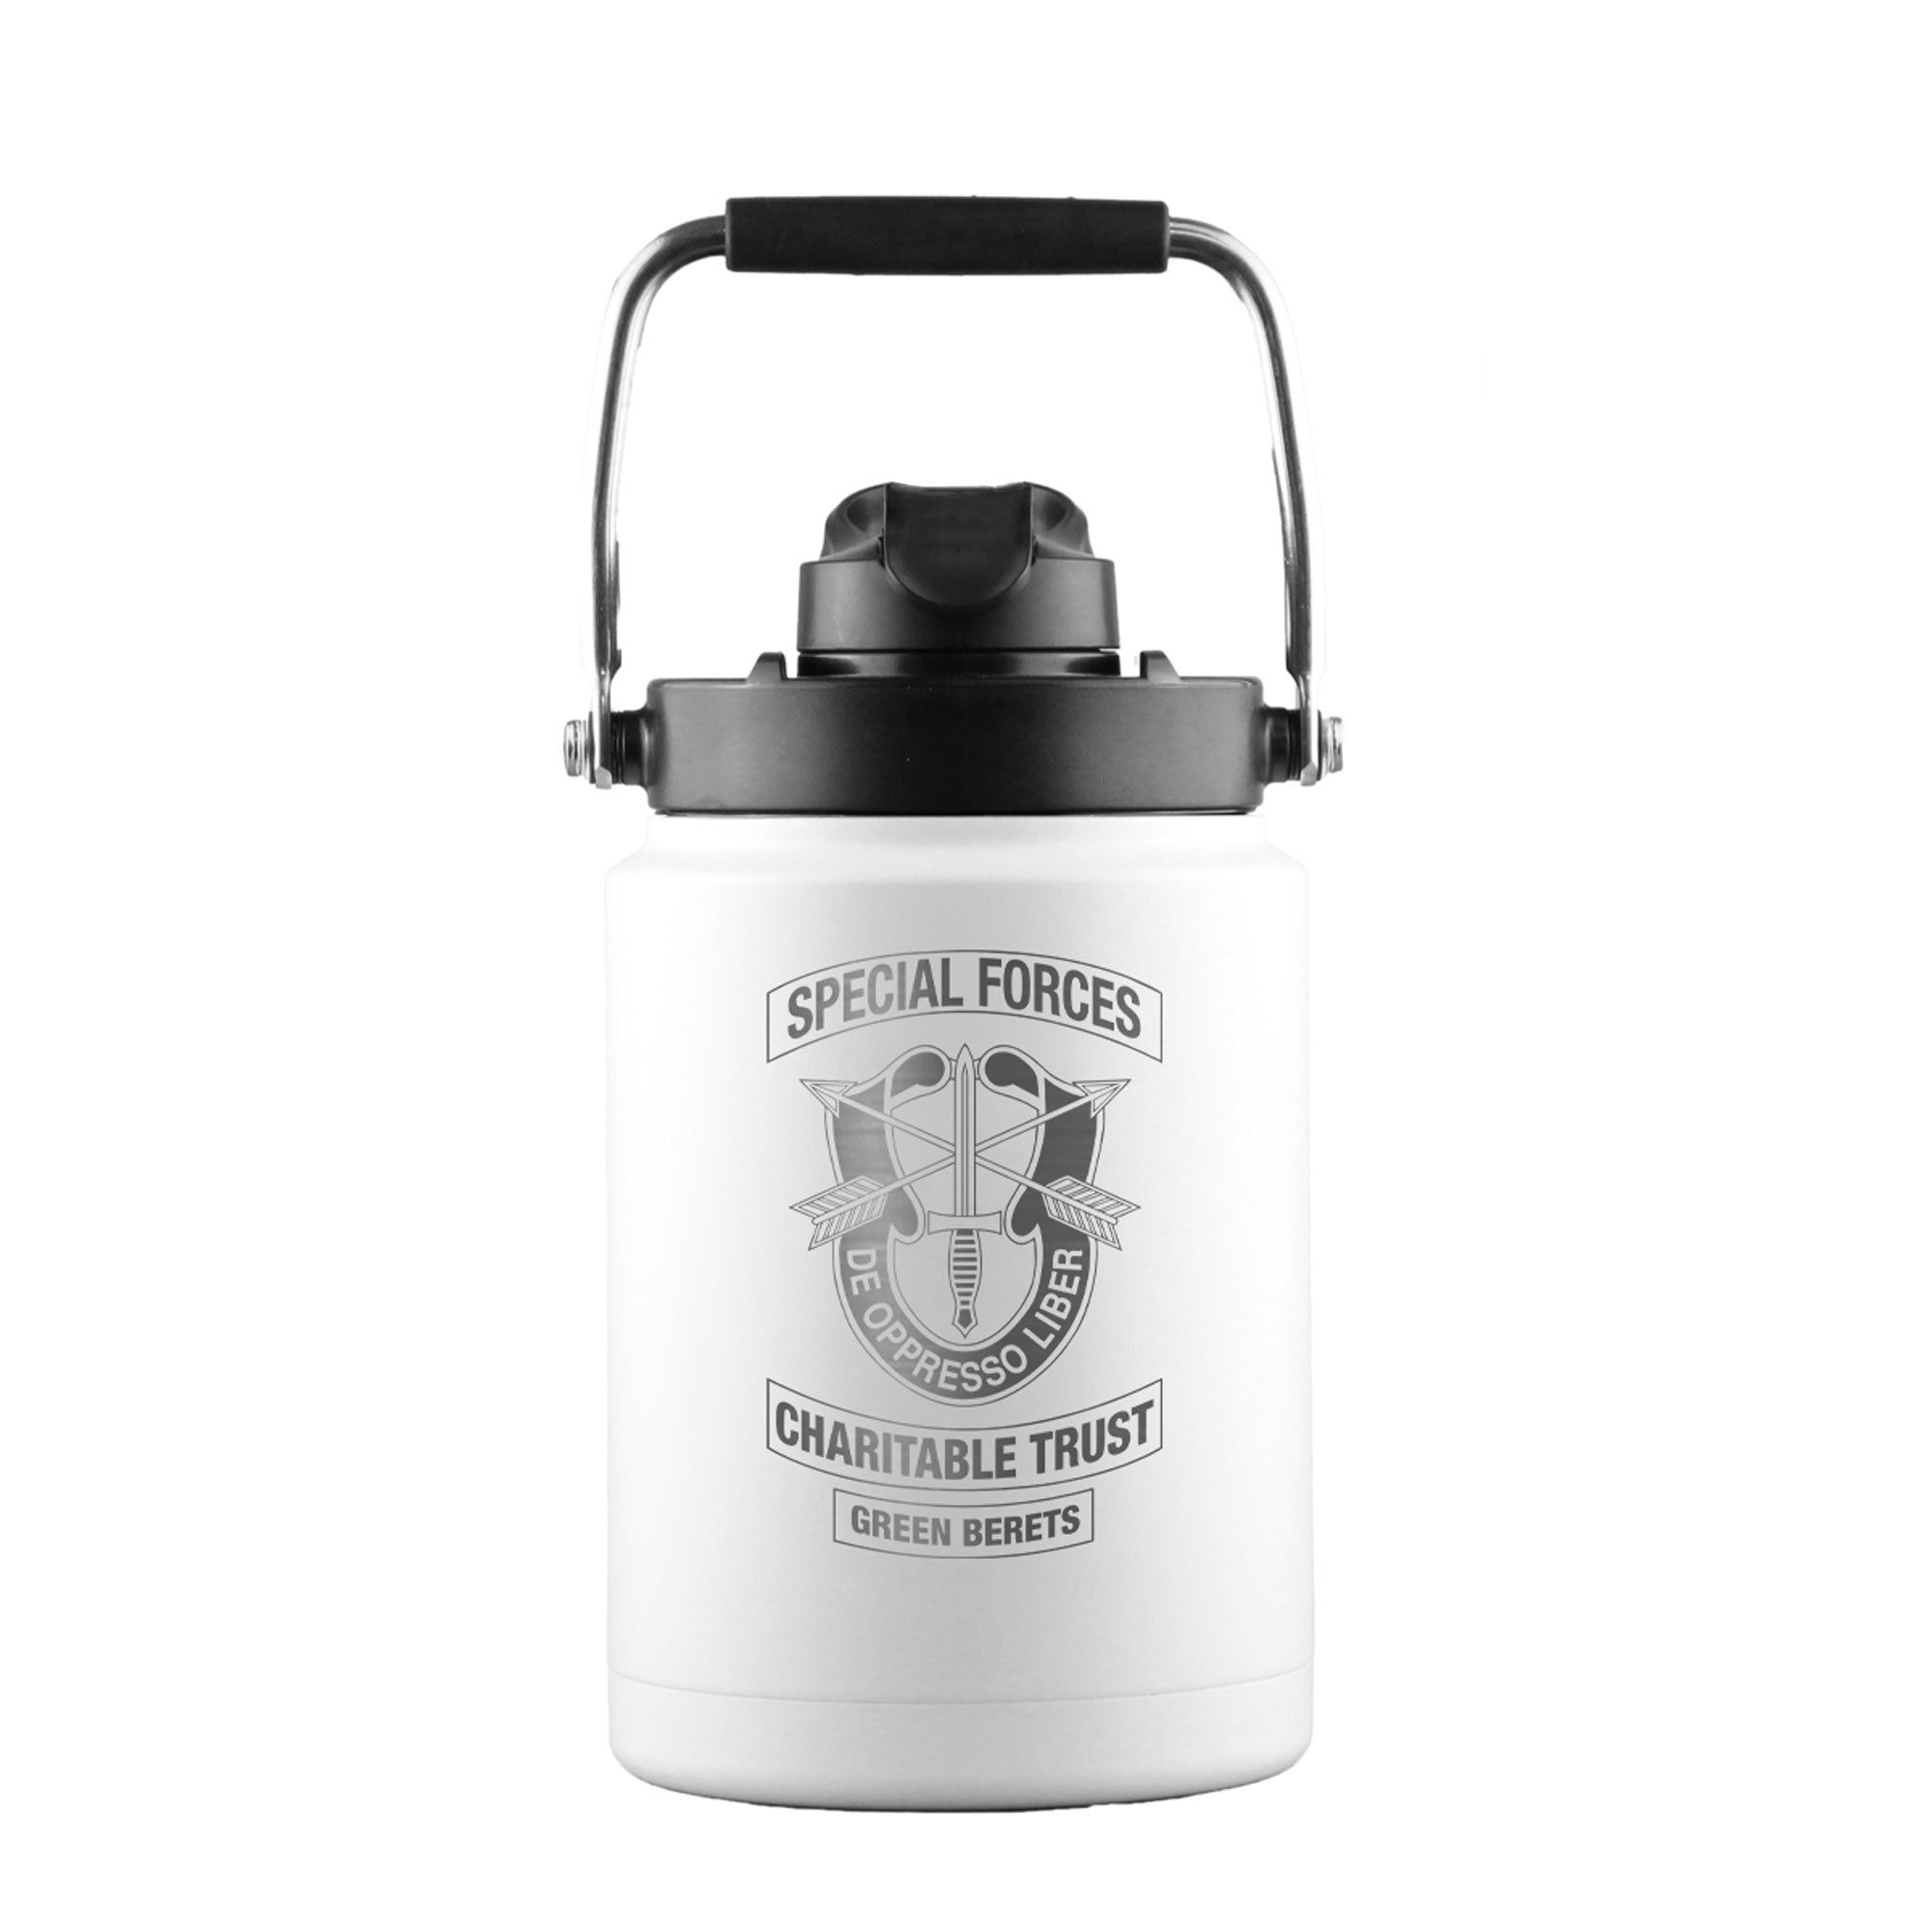 Special Forces Charitable Trust Half Gallon Jug - White